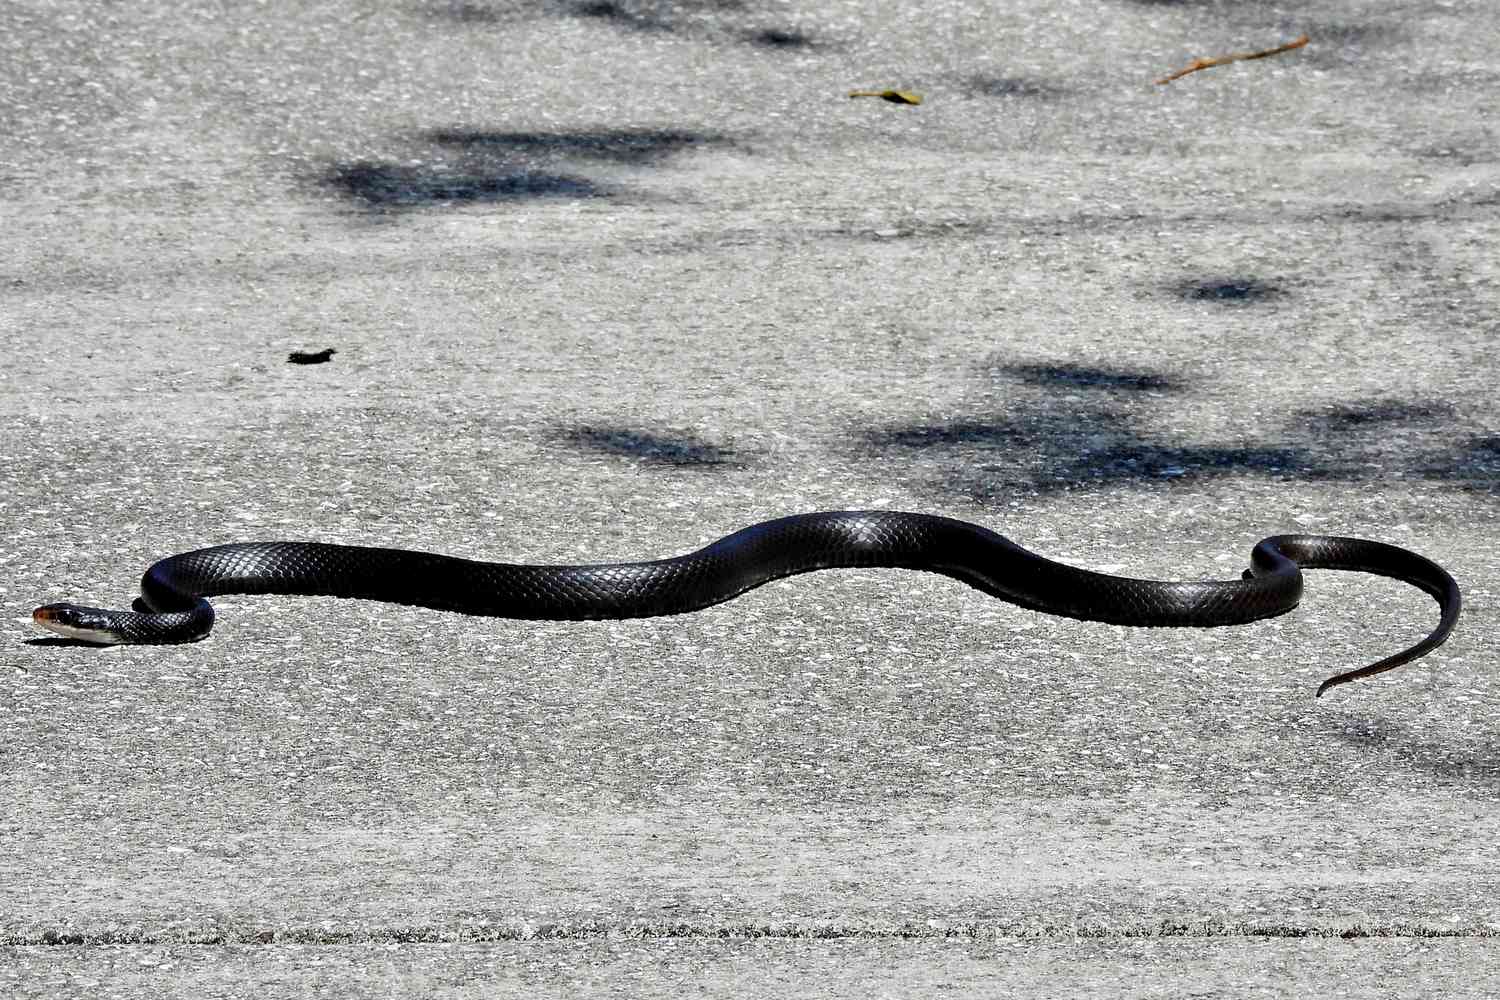 Snakes Nearly on a Plane: Reptile Caught Trying to Enter the Dallas Fort Worth Airport